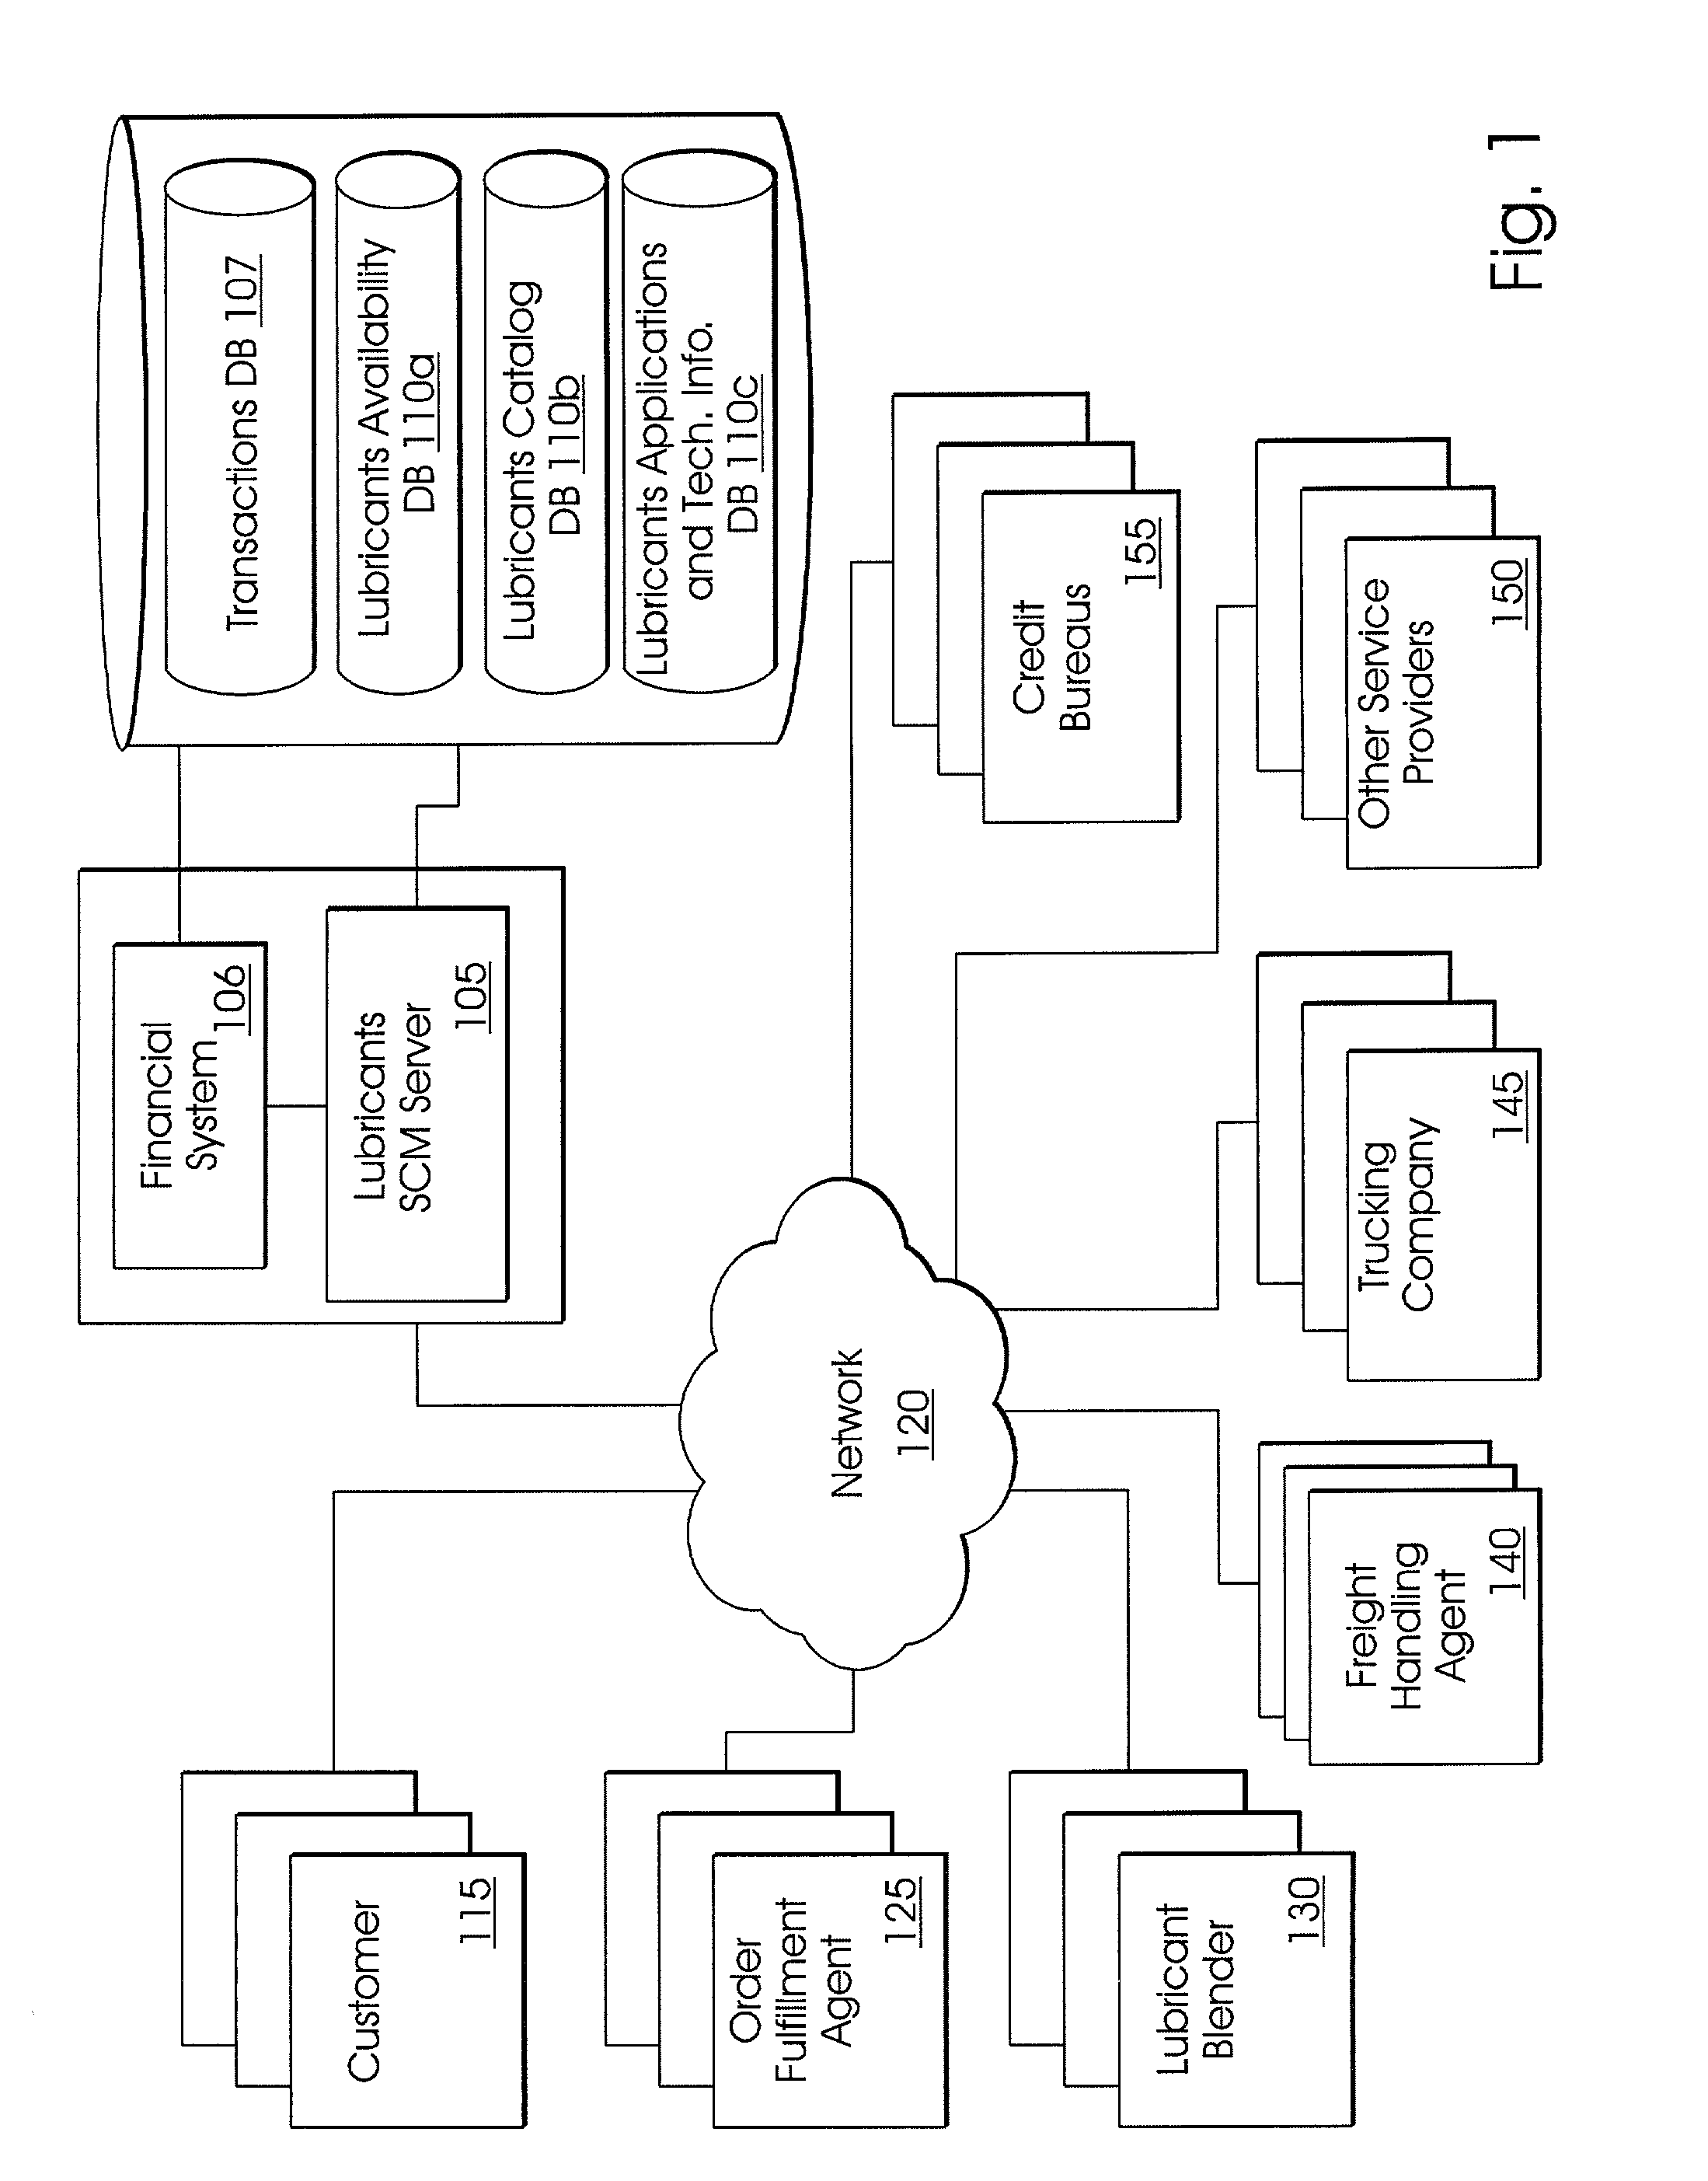 System and method for lubricants supply chain management